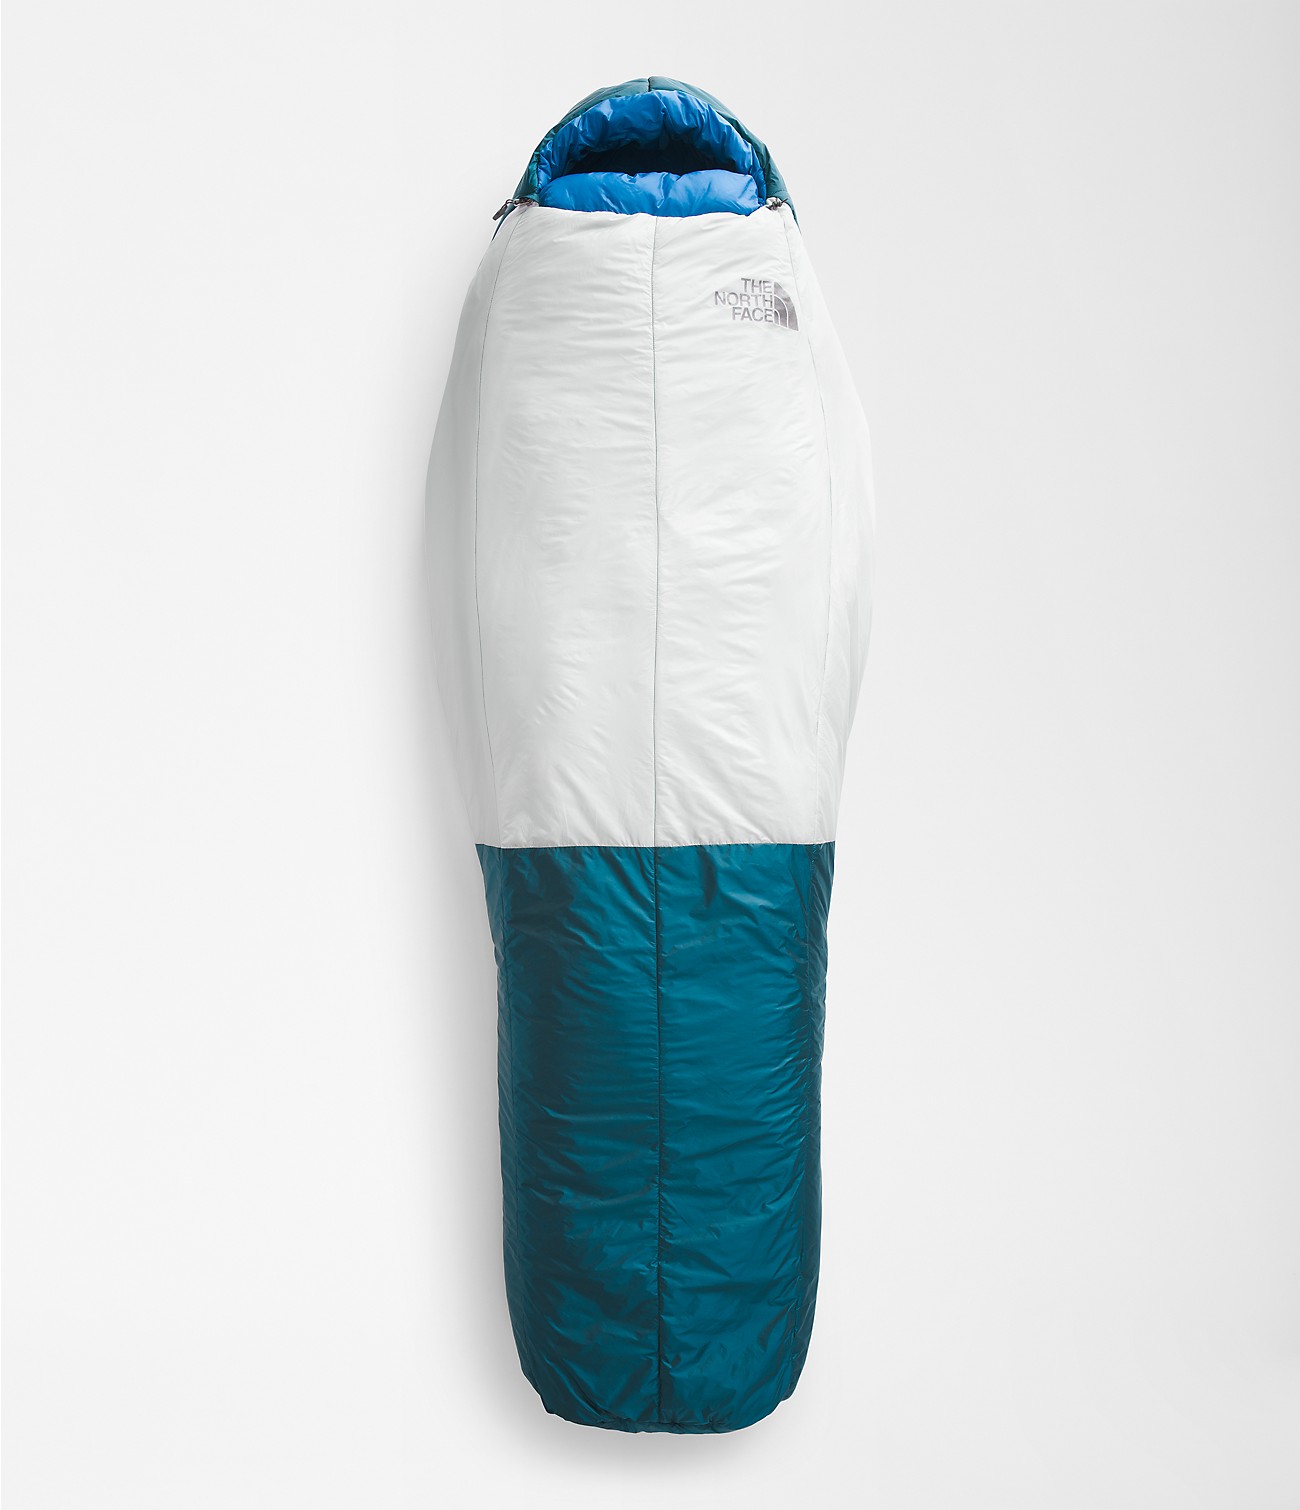 The North Face ® Cat's Meow Eco Sleeping Bag